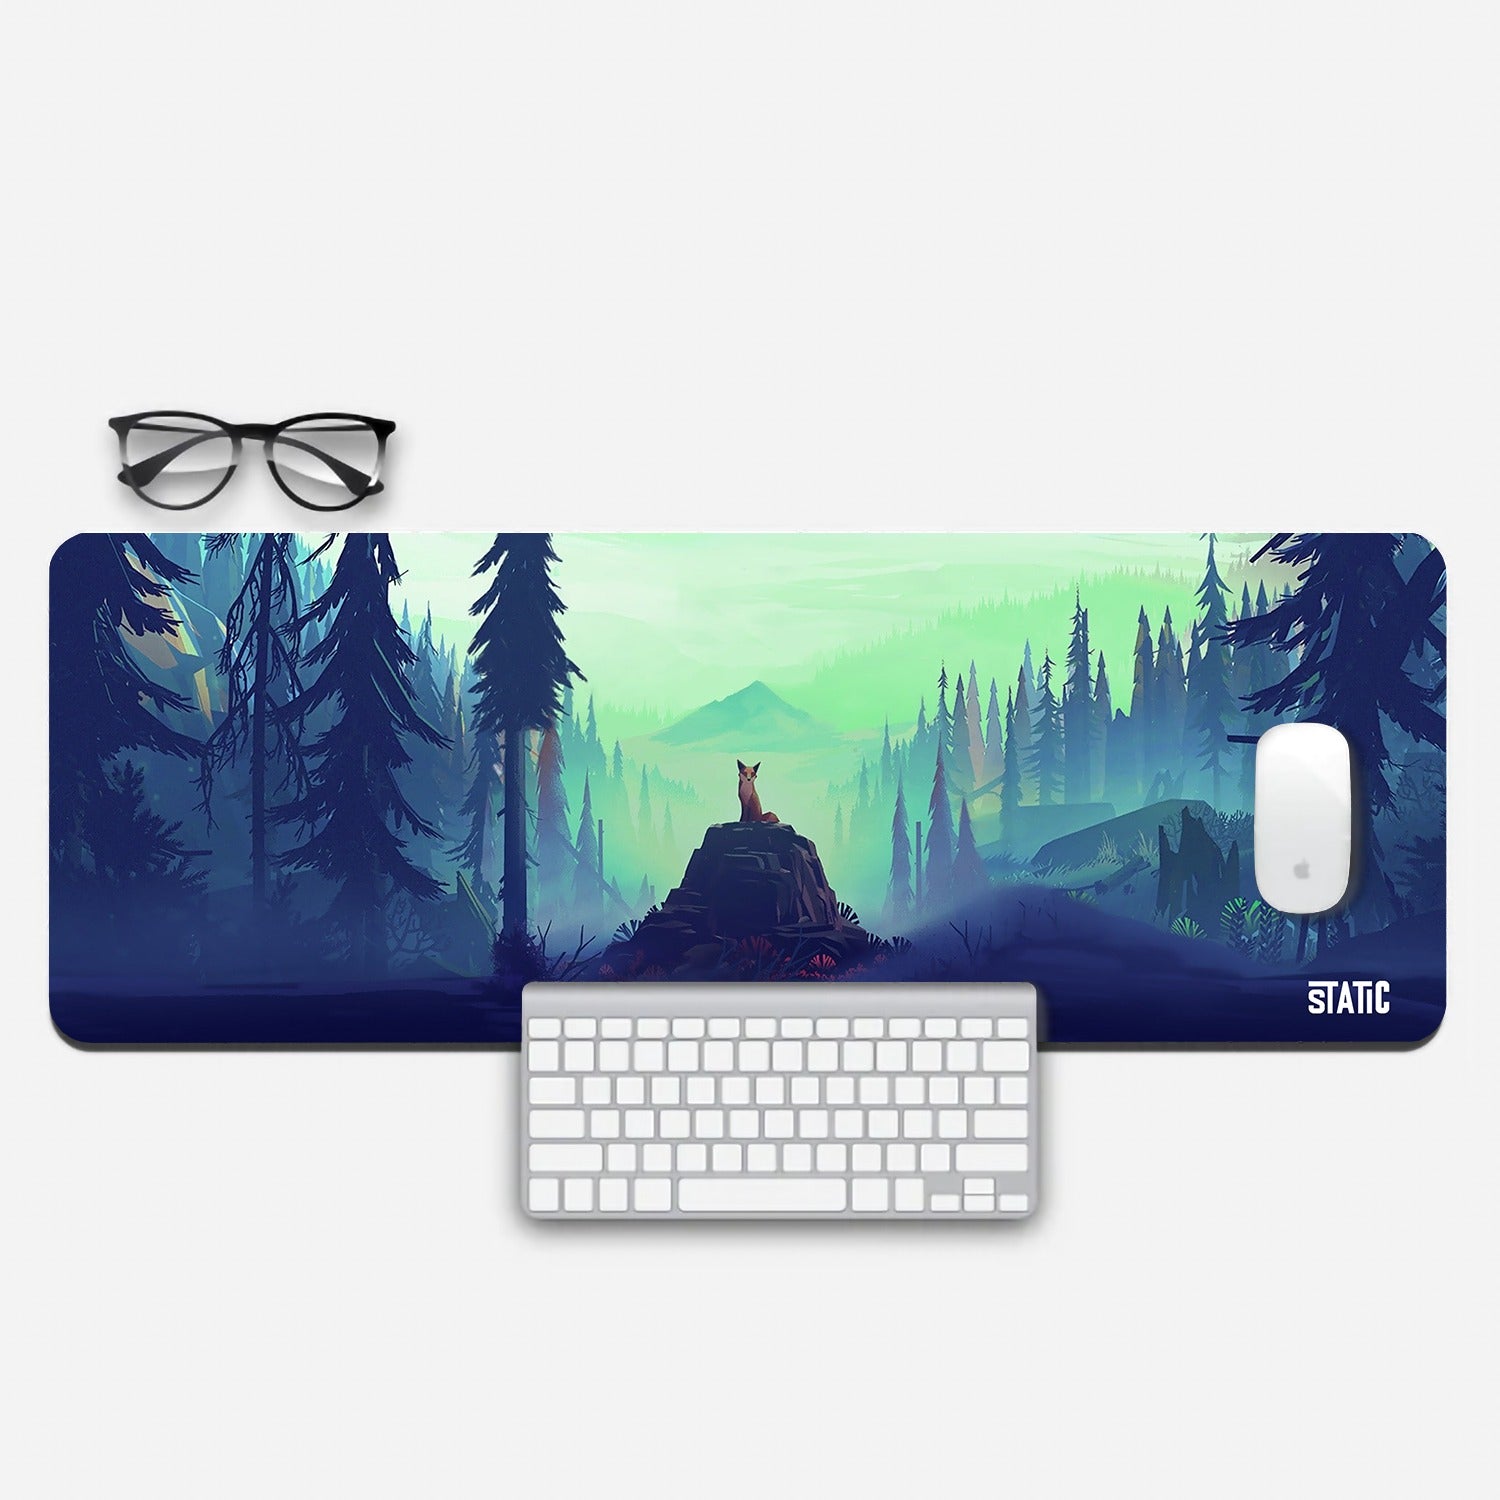 Elevate your gaming experience with our Extended Gaming Mouse Pad featuring a breathtaking red evening sky, a captivating transparent moon, and the silhouette of a mountain crowned by a howling wolf. This stunning design brings the magic of twilight to your gaming setup, enhancing both aesthetics and precision. Immerse yourself in the enchanting ambiance of dusk and conquer your virtual worlds with style and precision. Elevate your game today with this unique mouse pad.